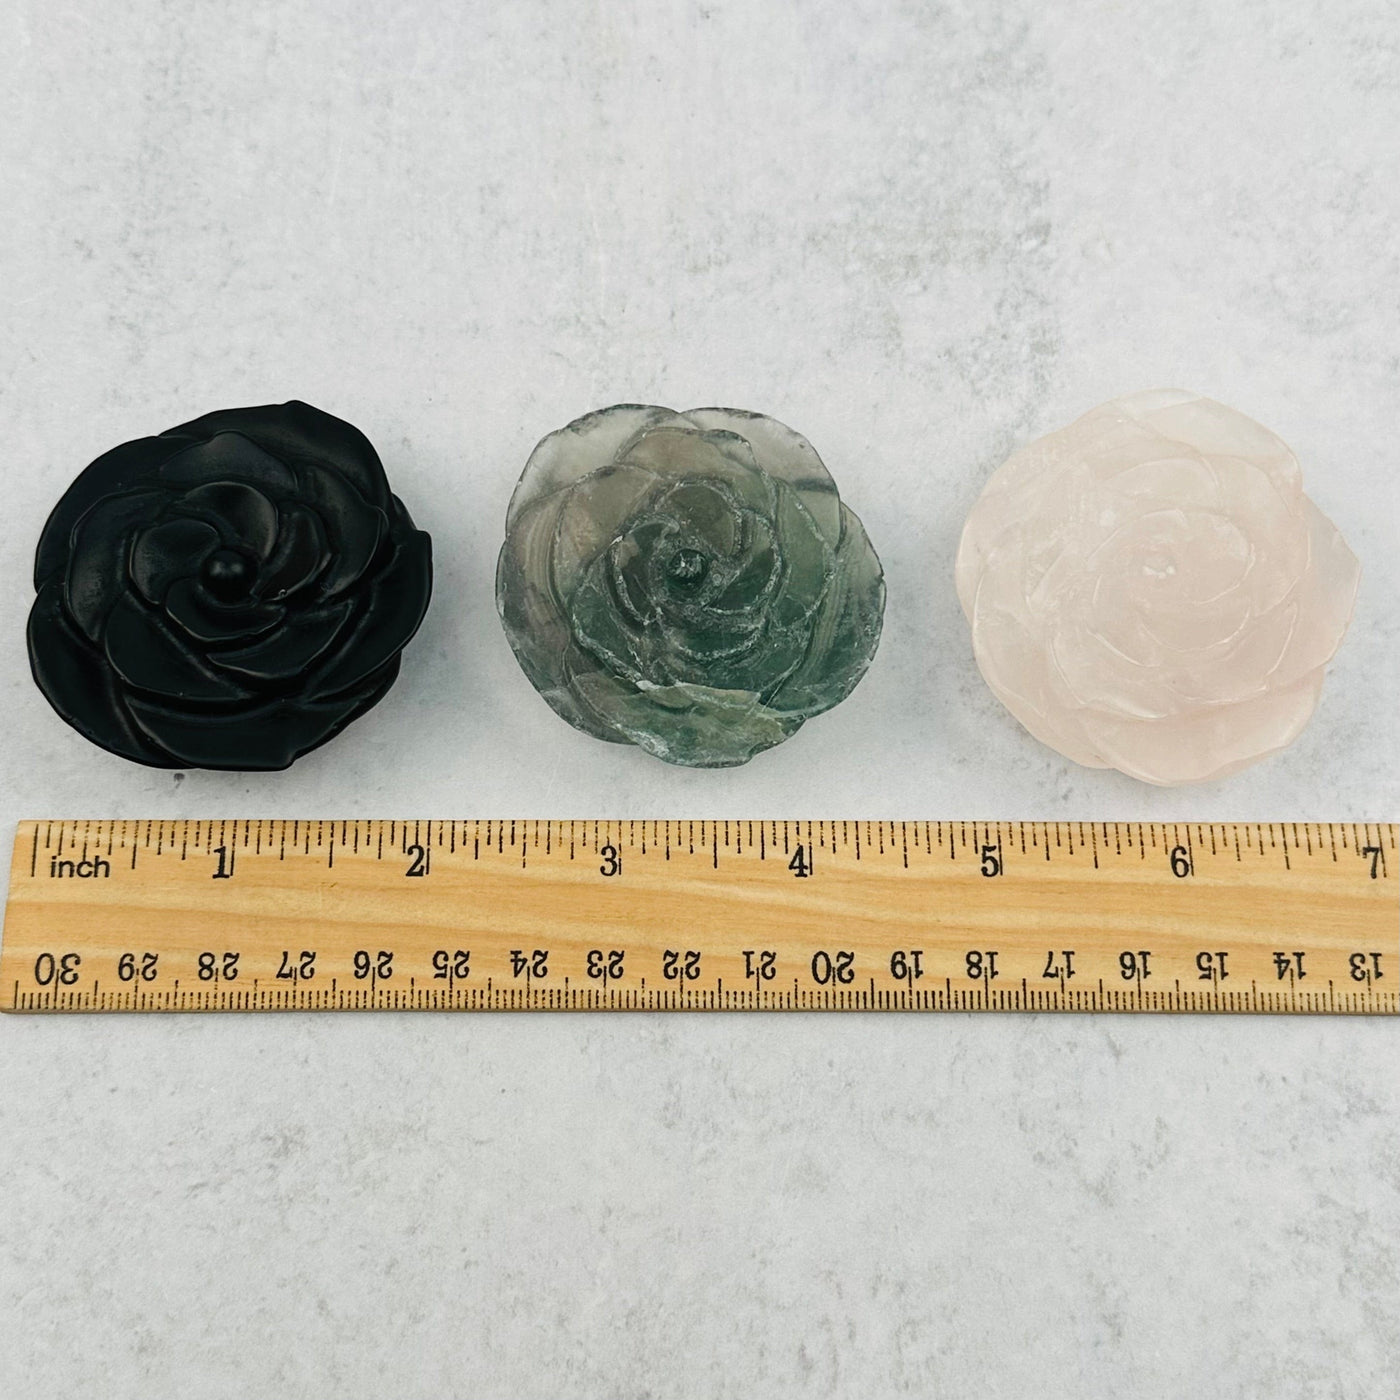 Gemstone Hand Carved Open Rose next to a ruler for size reference 